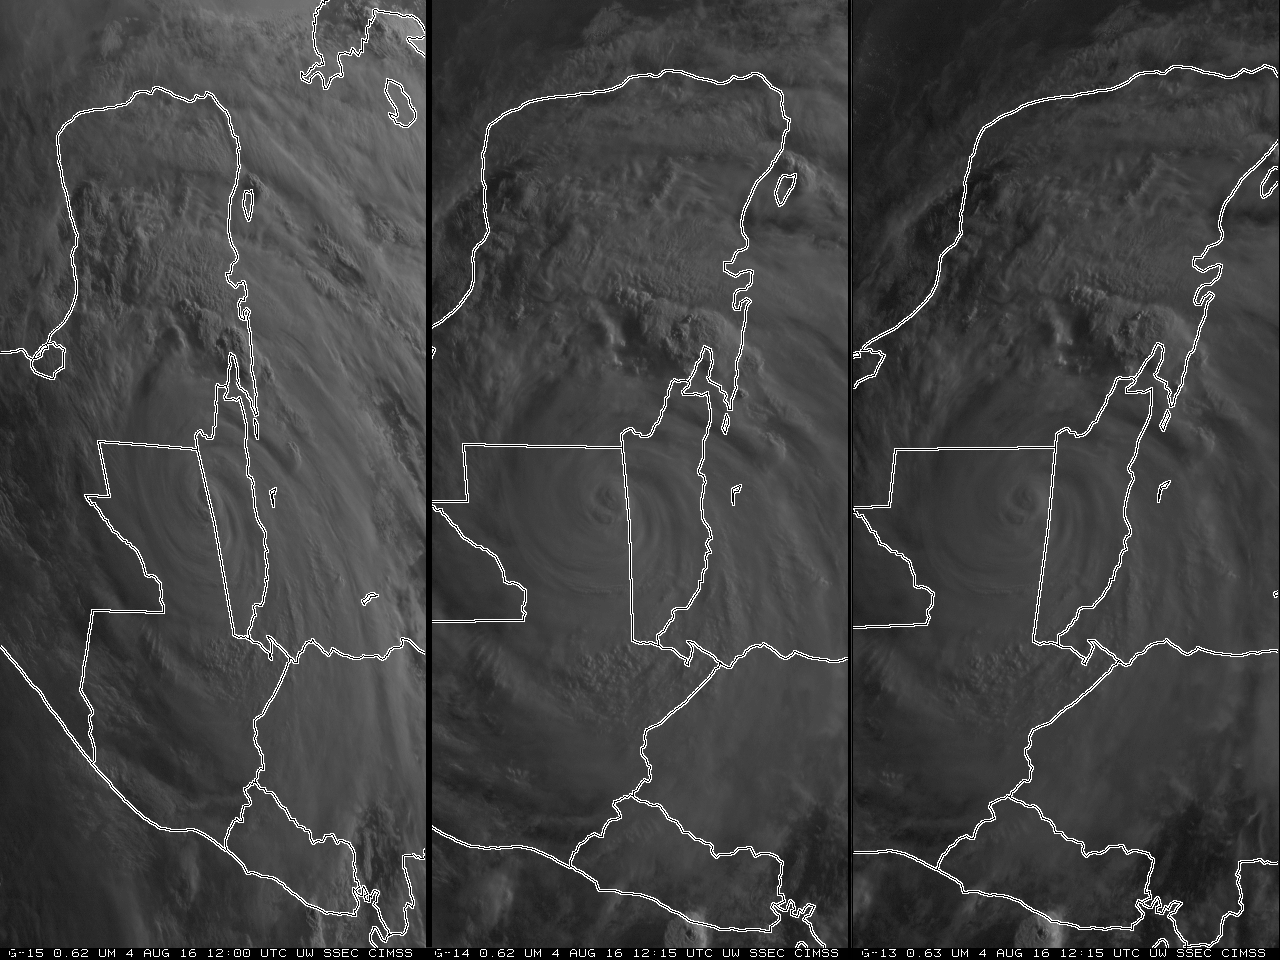 GOES-15, GOES-14, GOES-13 (left, center,right) Visible Imagery of Earl over Belize and Mexico, ~1200 UTC on 4 August 2016 [click to enlarge]